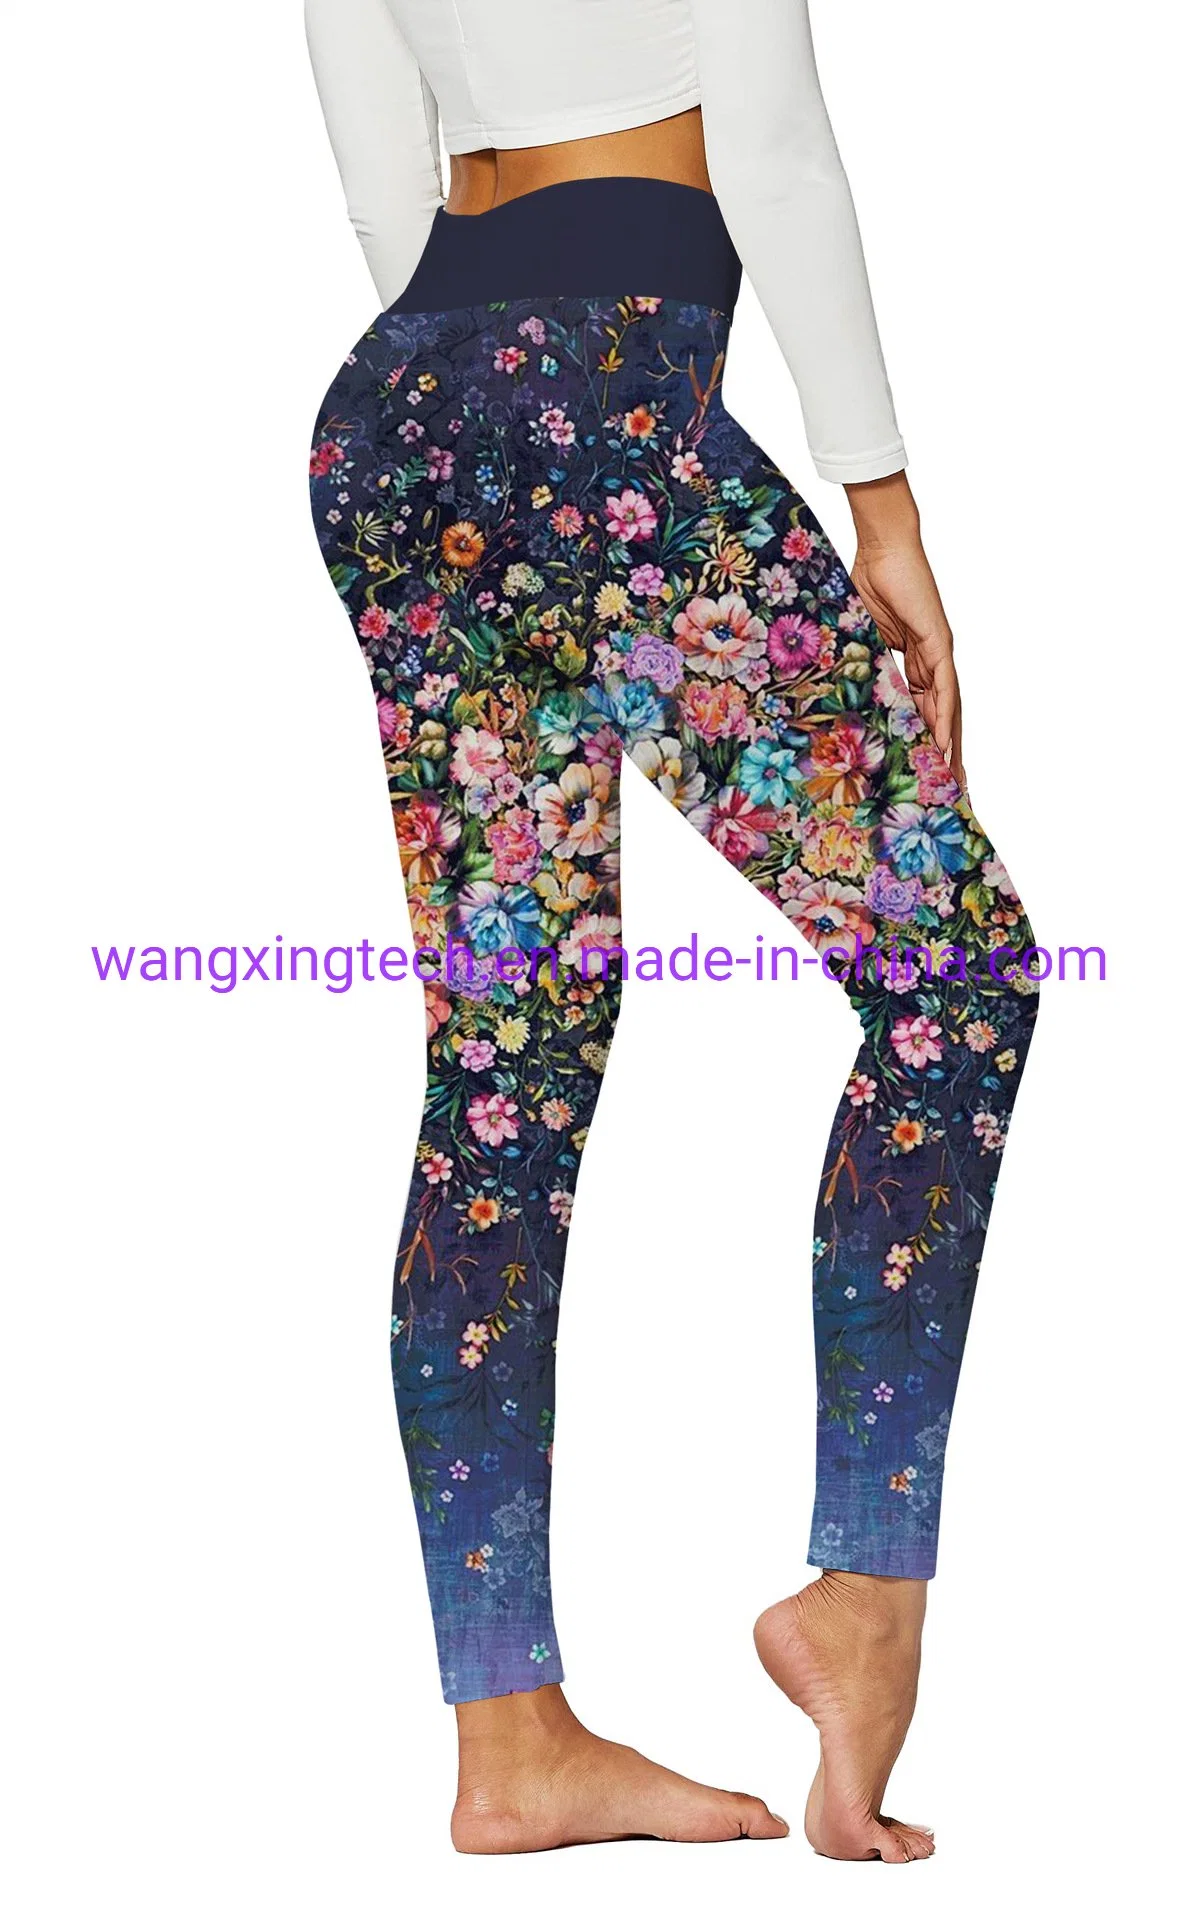 Wholesale/Supplier 2022 New Yoga Clothes Sports Fitness High Waist Hip Leggings Digital Printing Yoga Pants Trousers